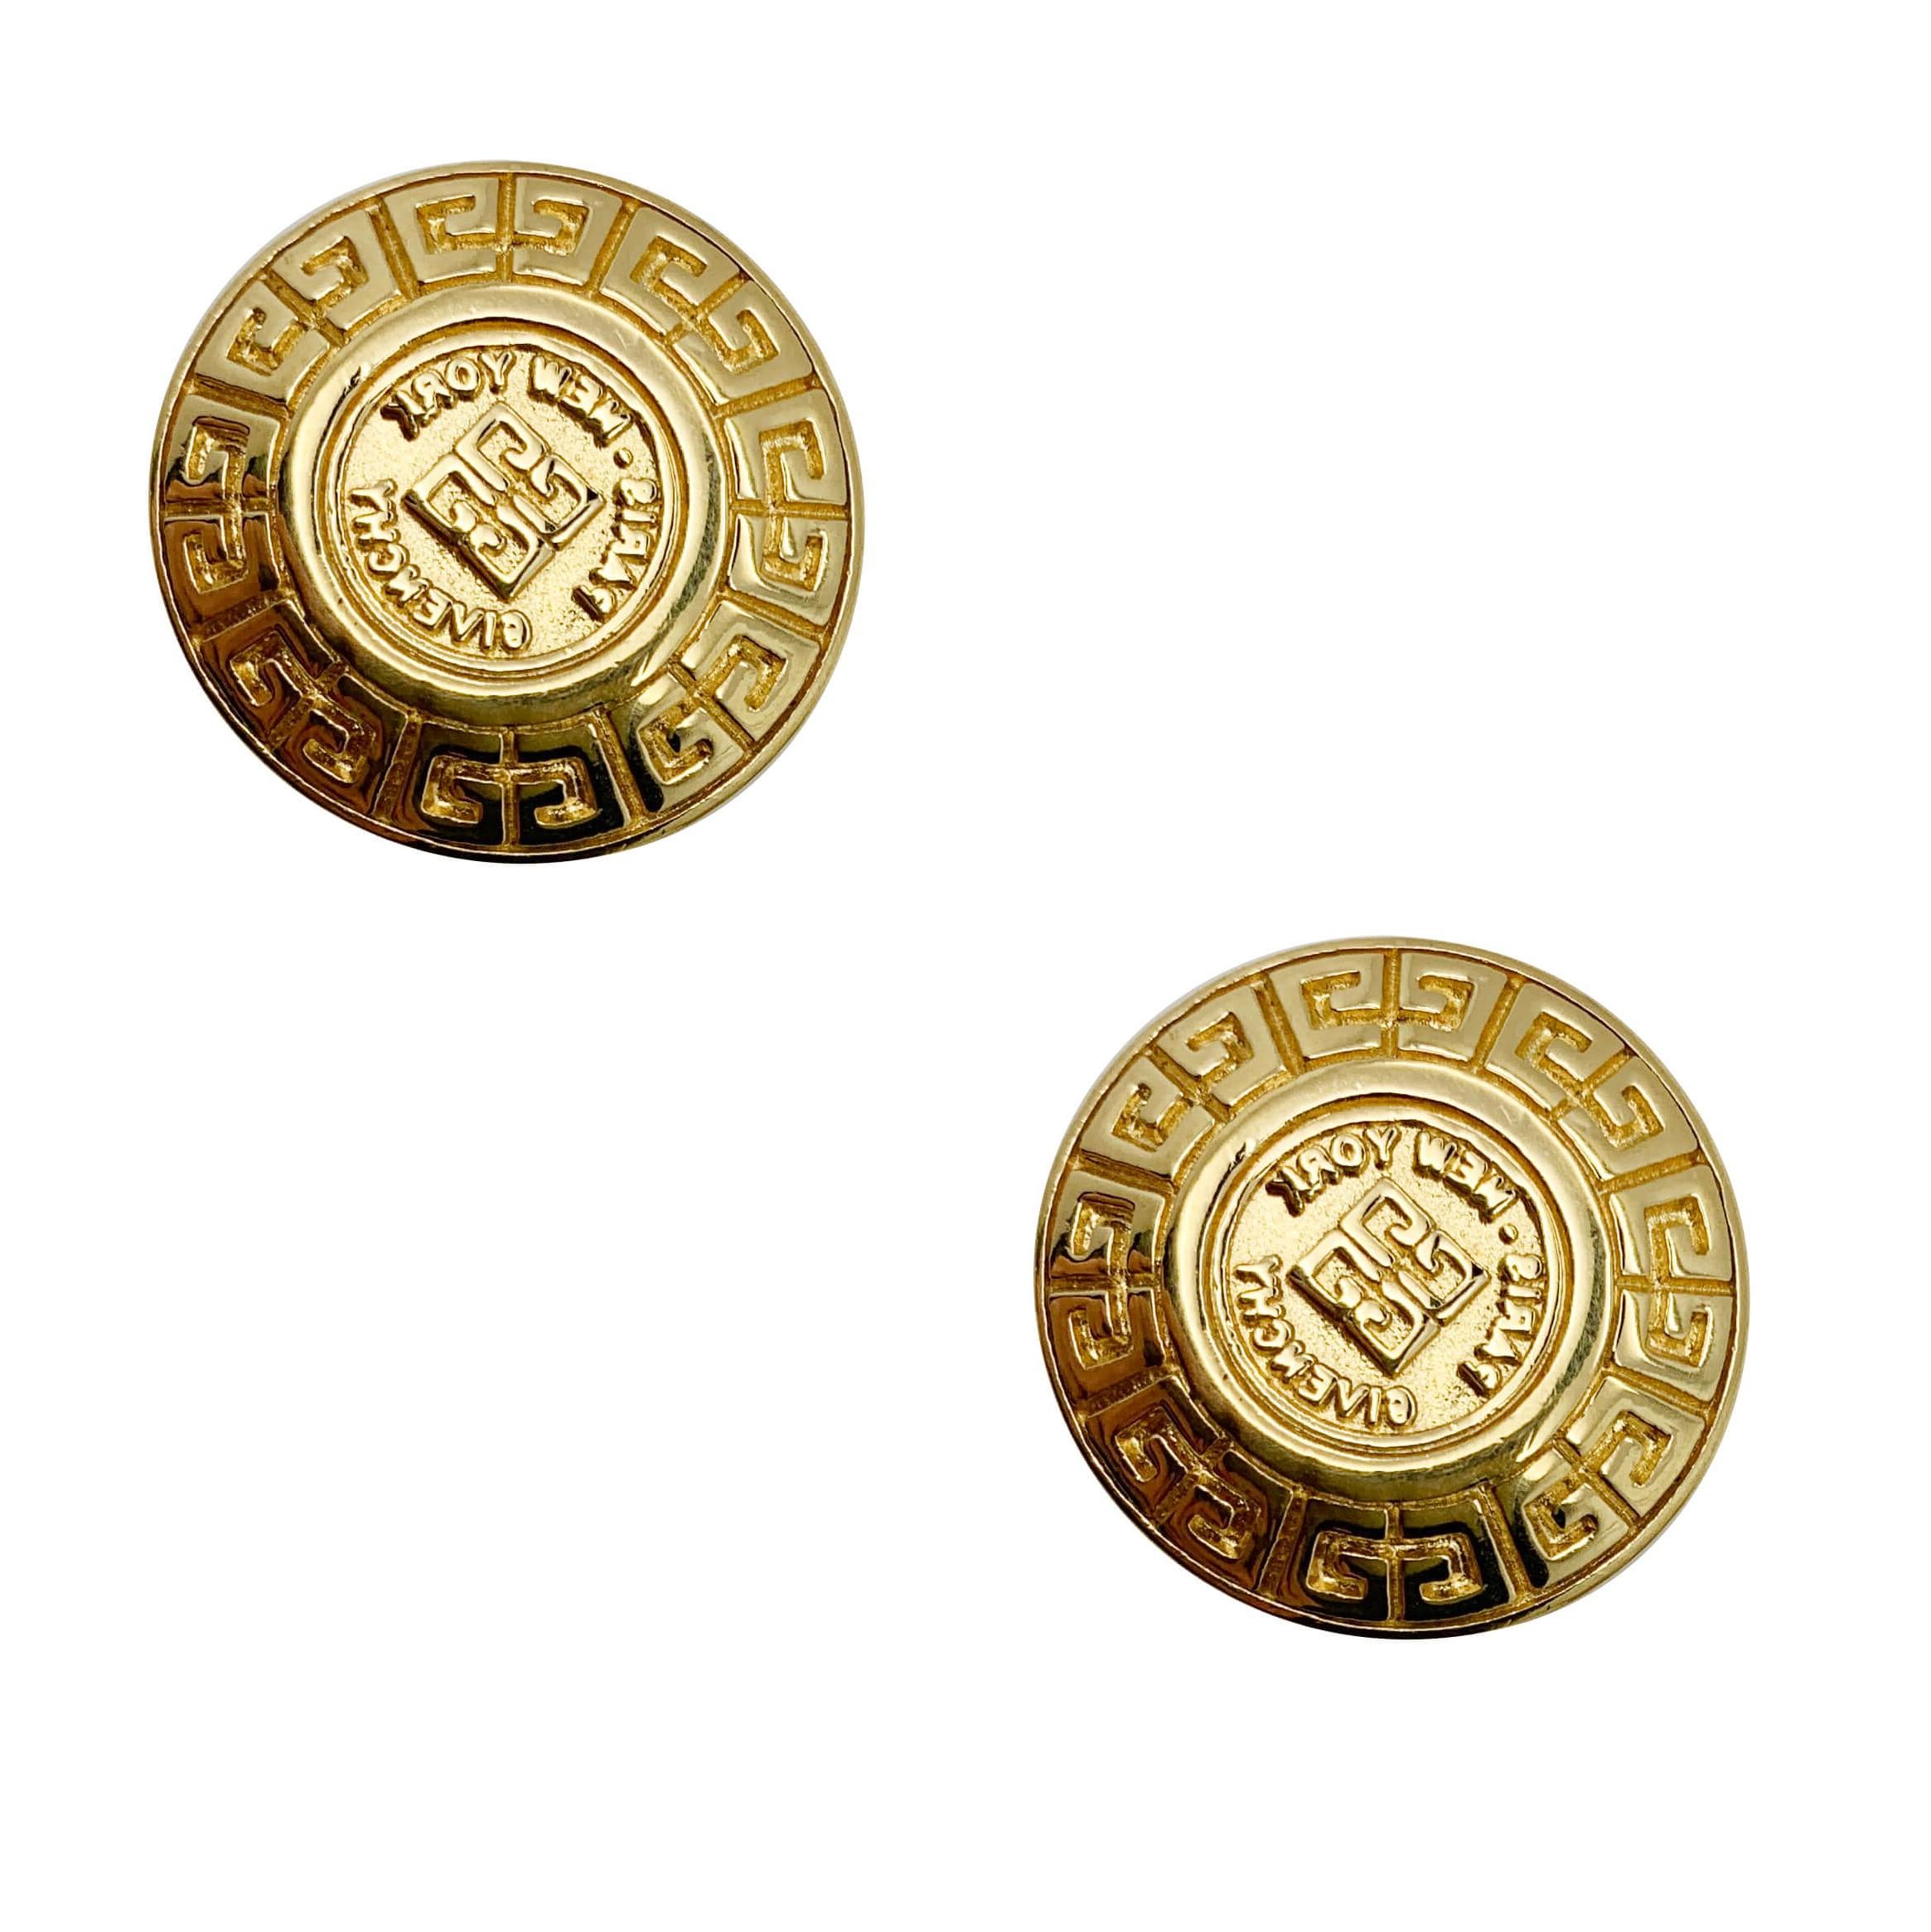 A pair of Vintage Givenchy Coin Logo Earrings in a disc style, adorned with the iconic 4G logo of the House

Vintage Condition: Very good
Materials: Gold Plated metal
Signed: Givenchy
Fastening: Clip
Approx. Dimensions: 2.2cms
The quintessential